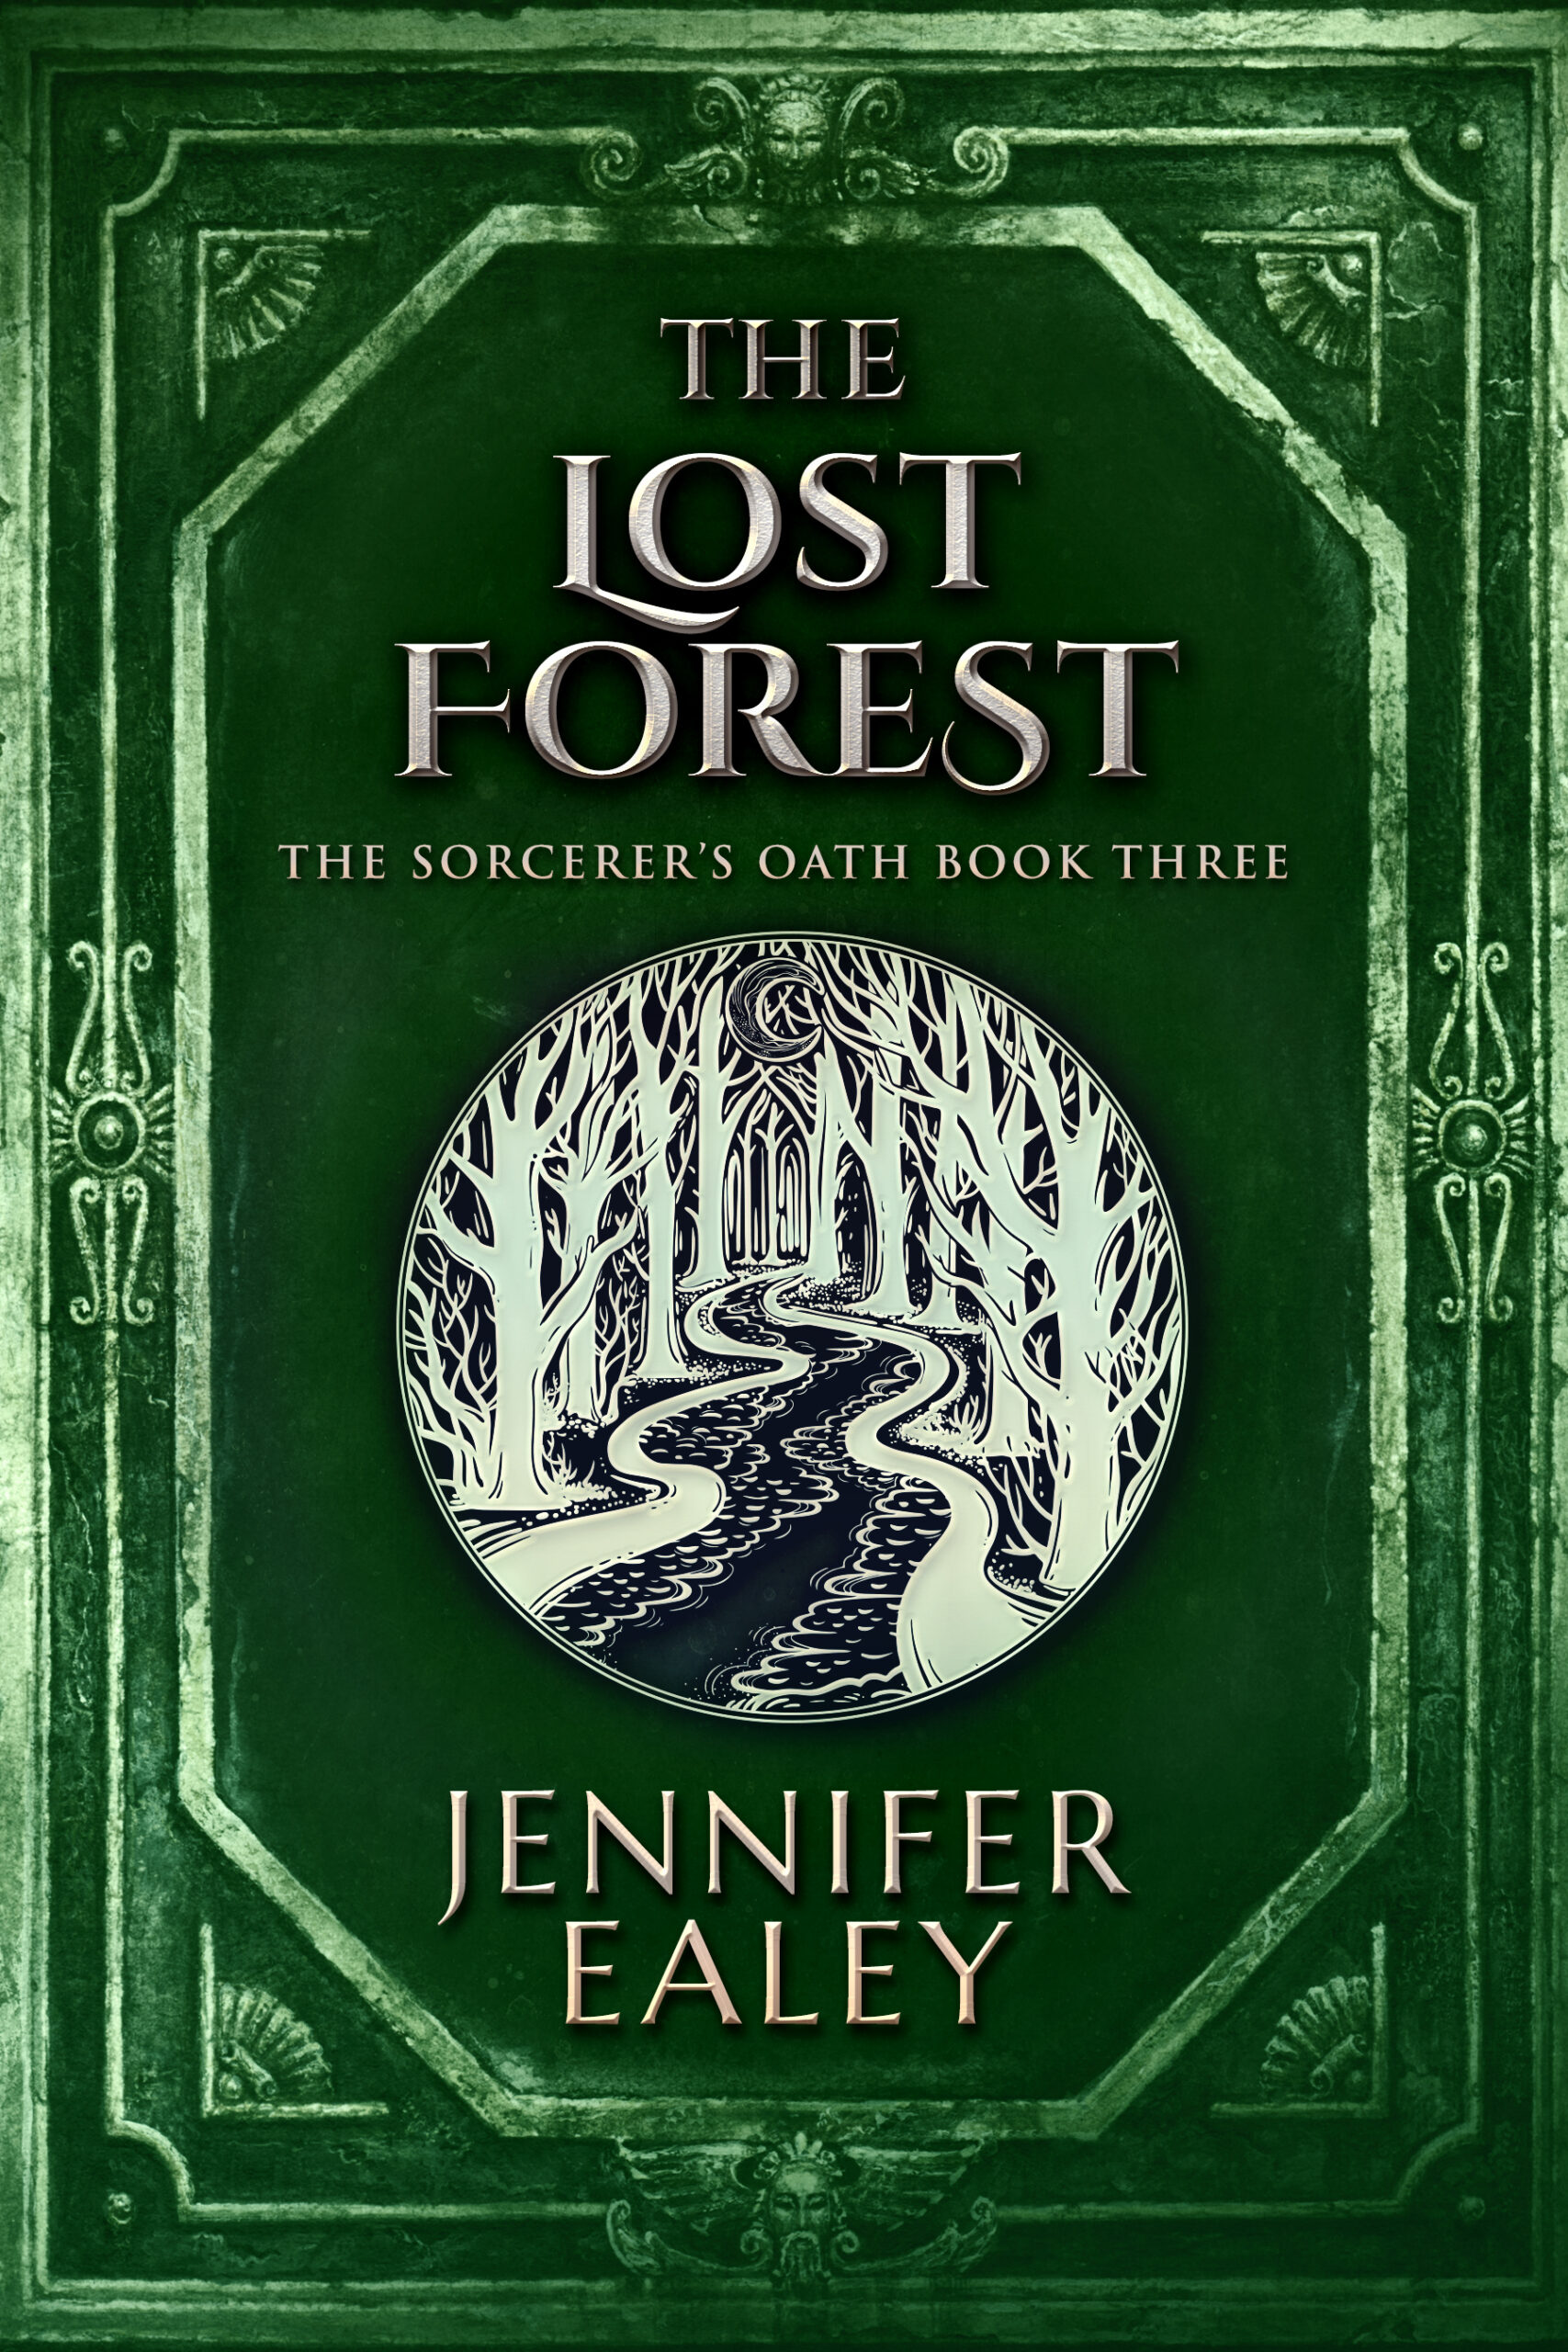 FREE: The Lost Forest by Jennifer Ealey